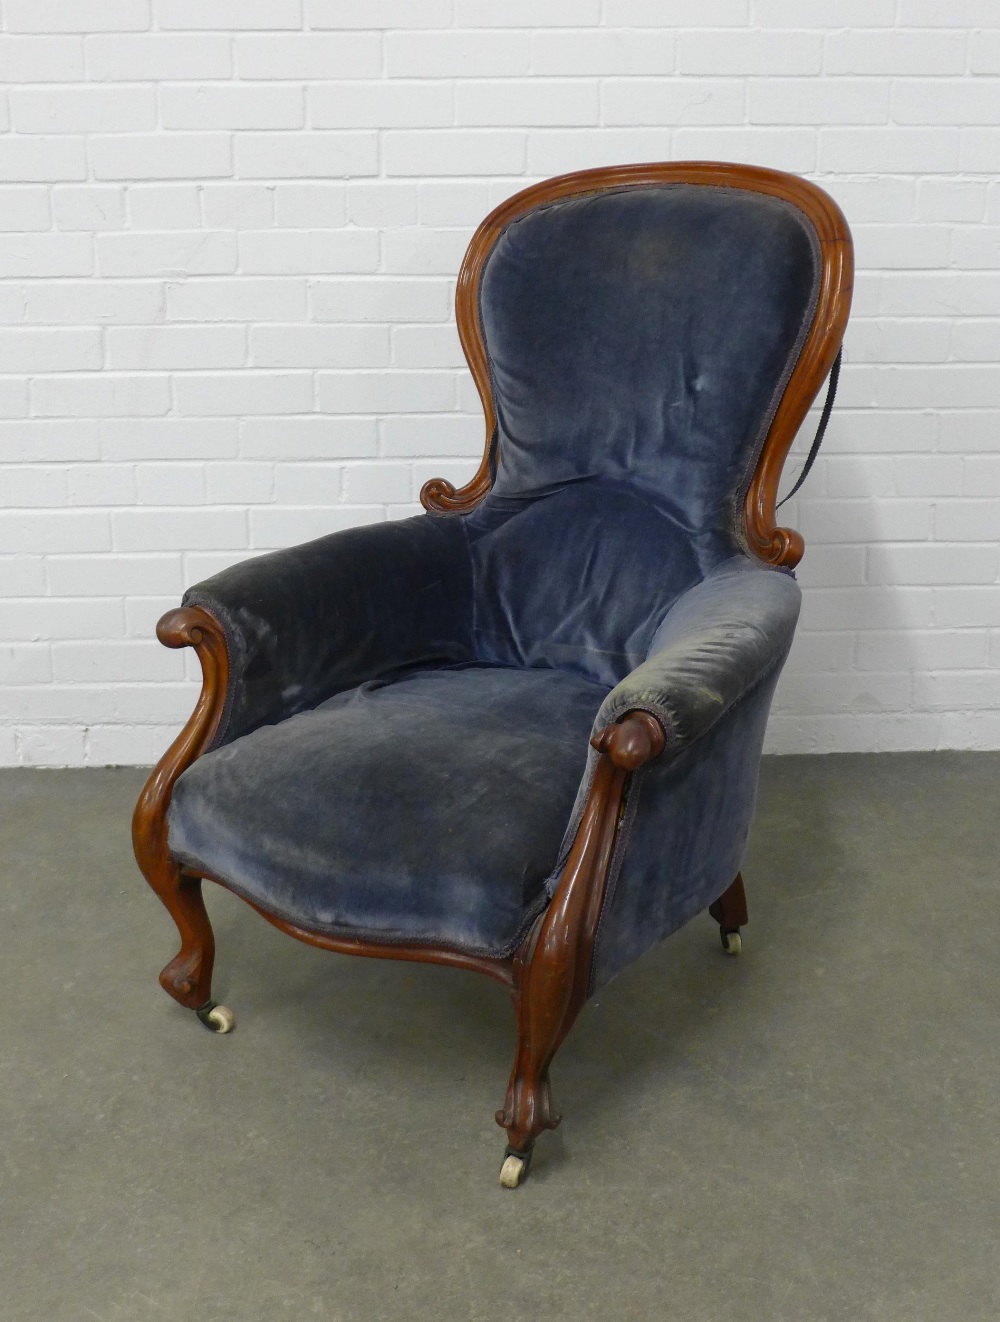 Victorian mahogany framed spoonback armchair with blue upholstery, raised on cabriole legs and